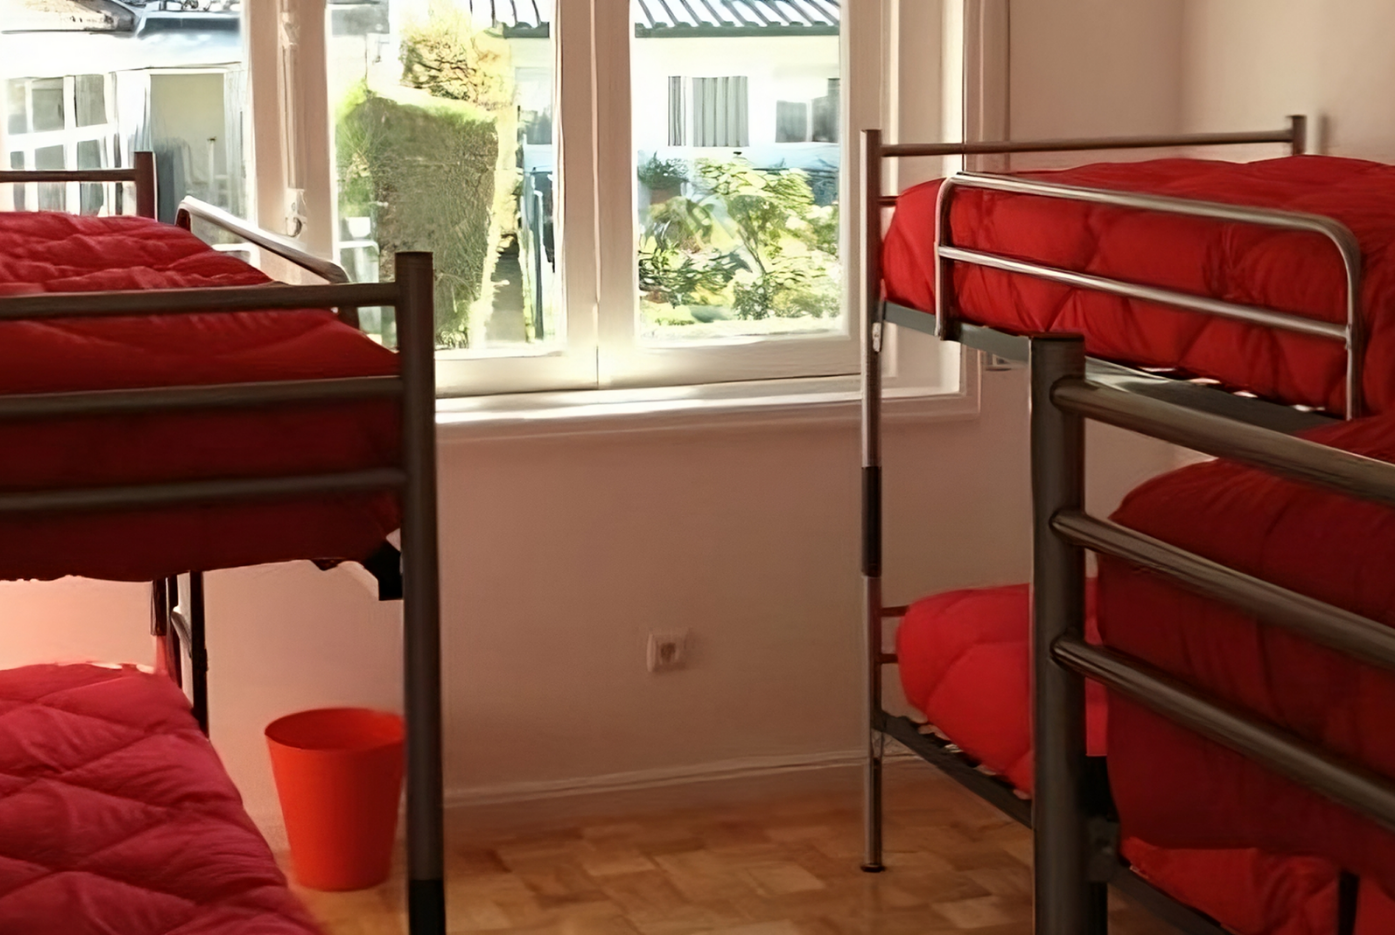 "Cork" 6-bed shared dorm in the AirPorto Hostel